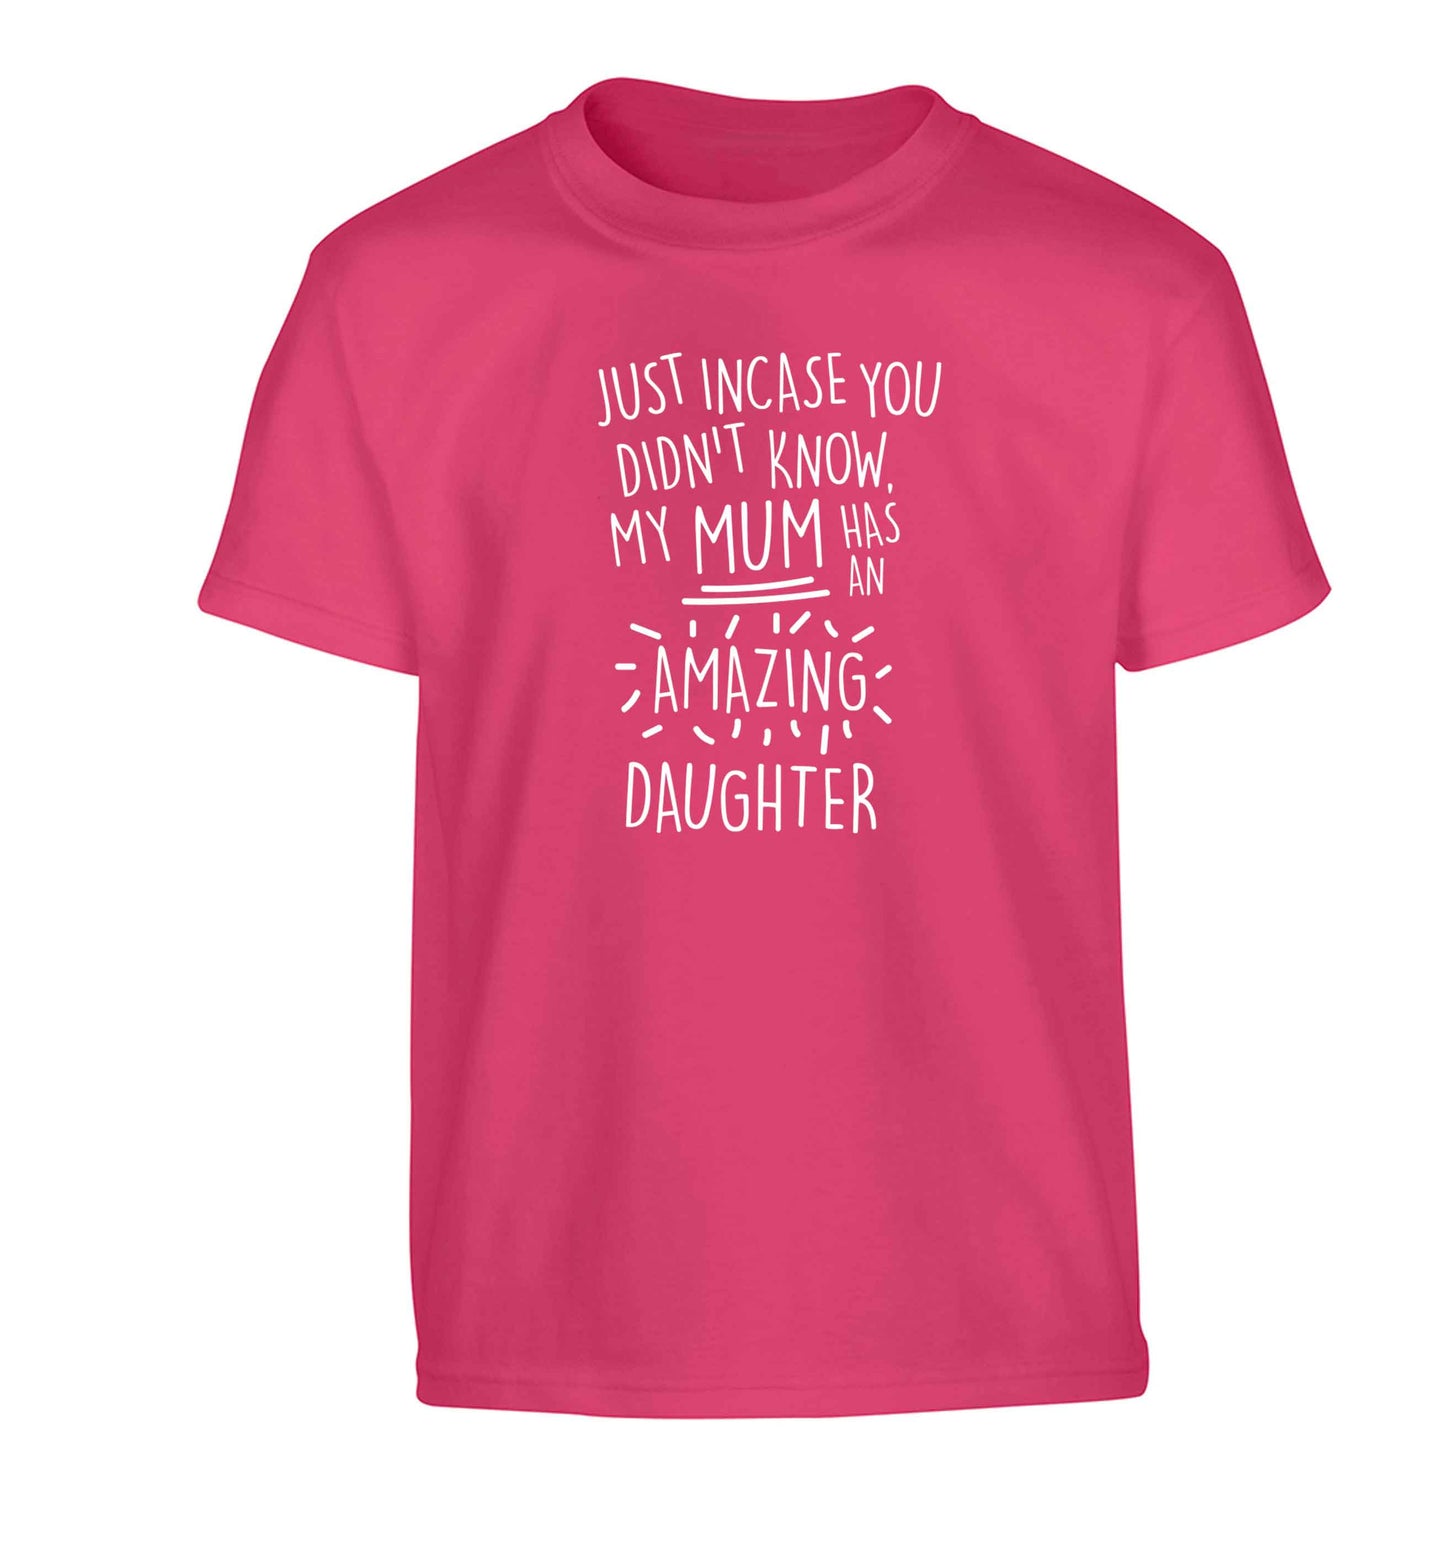 Just incase you didn't know my mum has an amazing daughter Children's pink Tshirt 12-13 Years